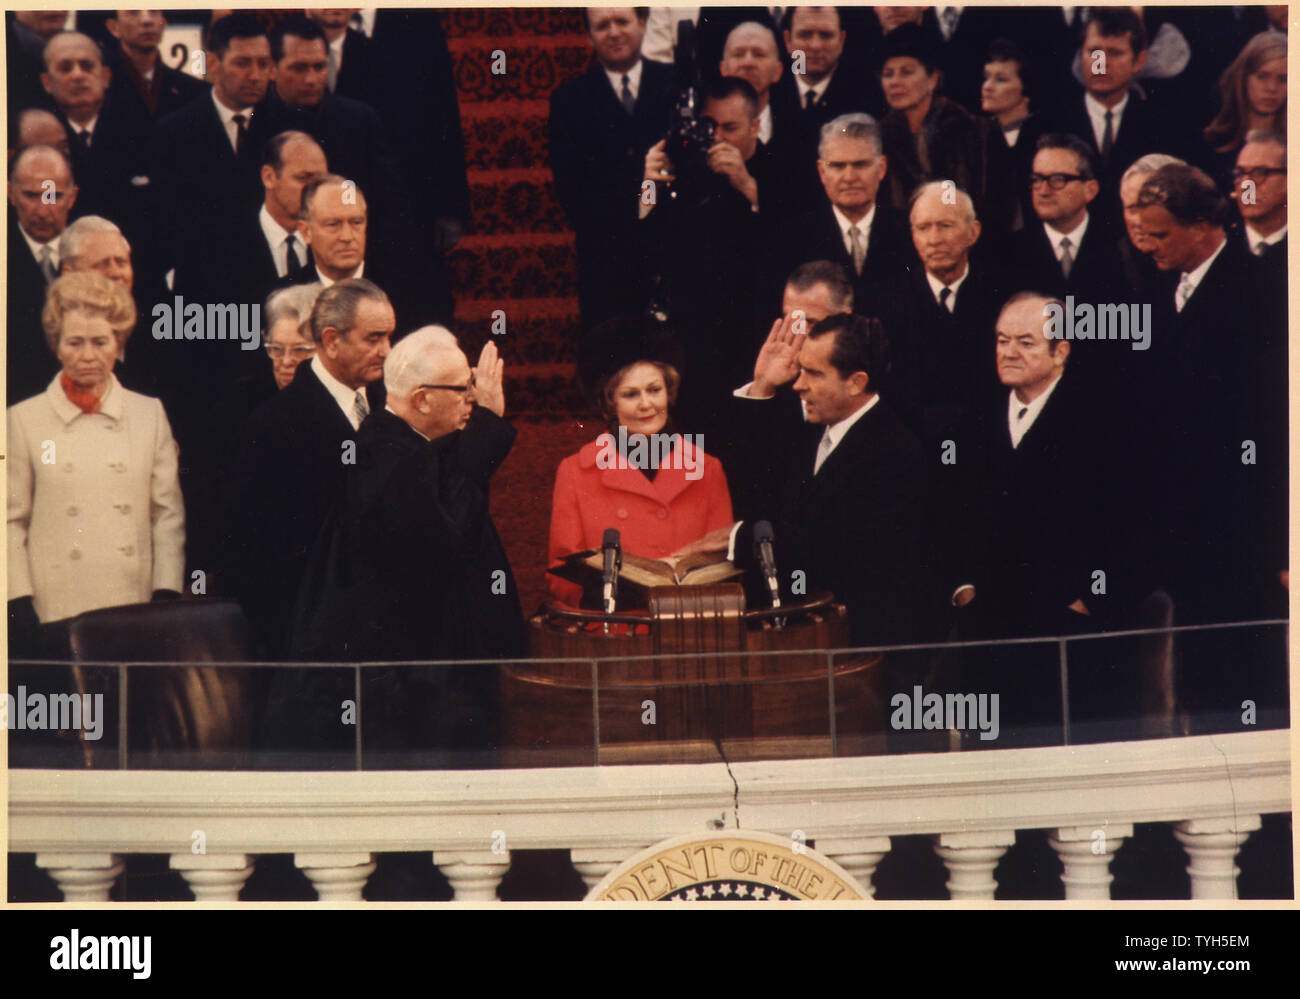 President Elect Nixon Taking The Oath Of Office As President Of The United States Scope And Content Pictured Lyndon Baines Johnson Everett M Dirksen Thelma Ryan Pat Nixon Richard M Nixon Hubert H